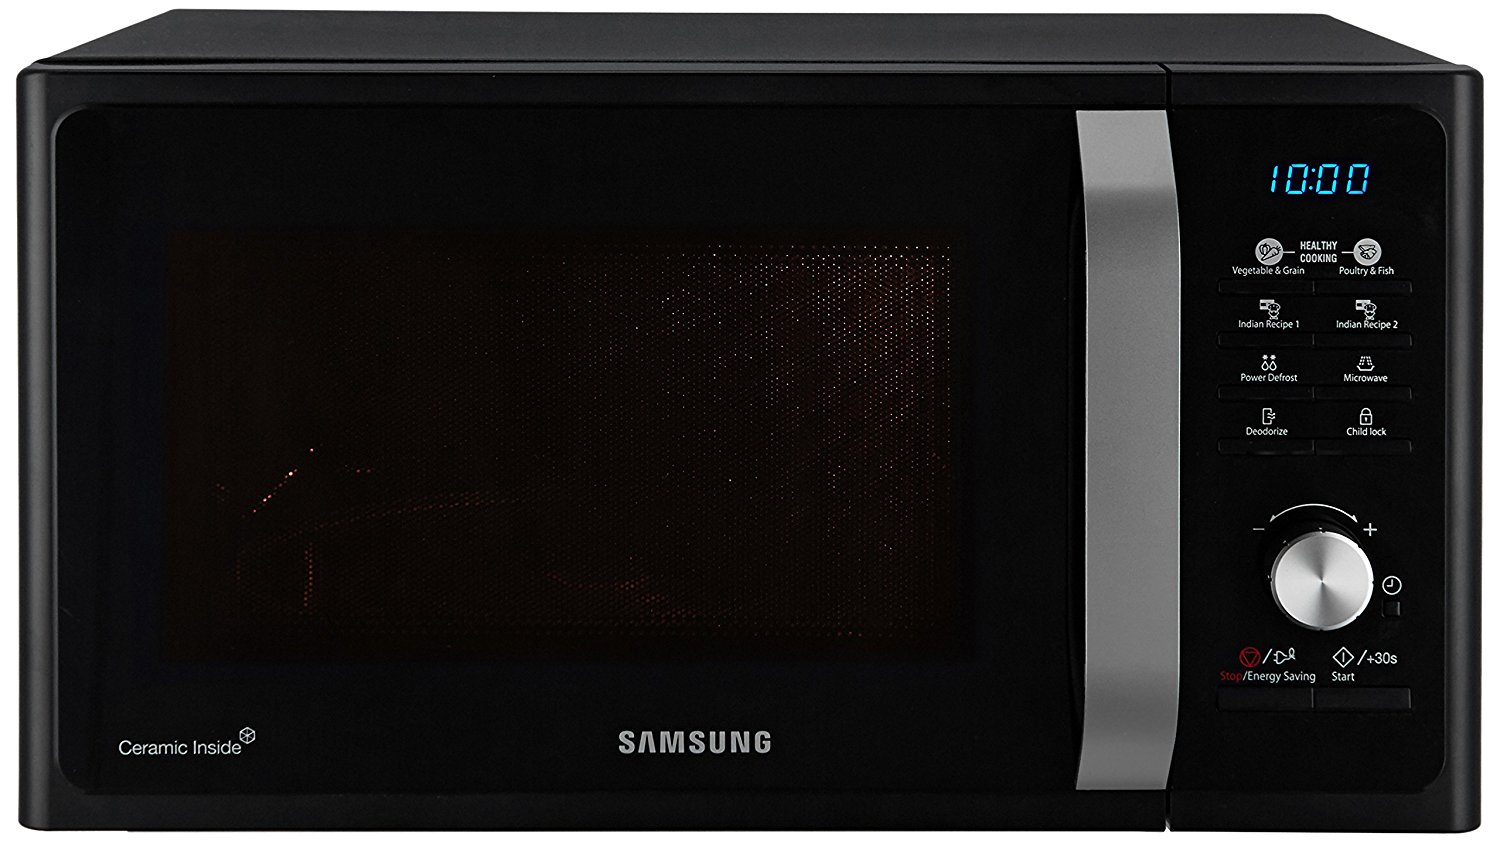 Samsung 23 L Grill Microwave Oven Mg23f301tck Black In Wholesale Price